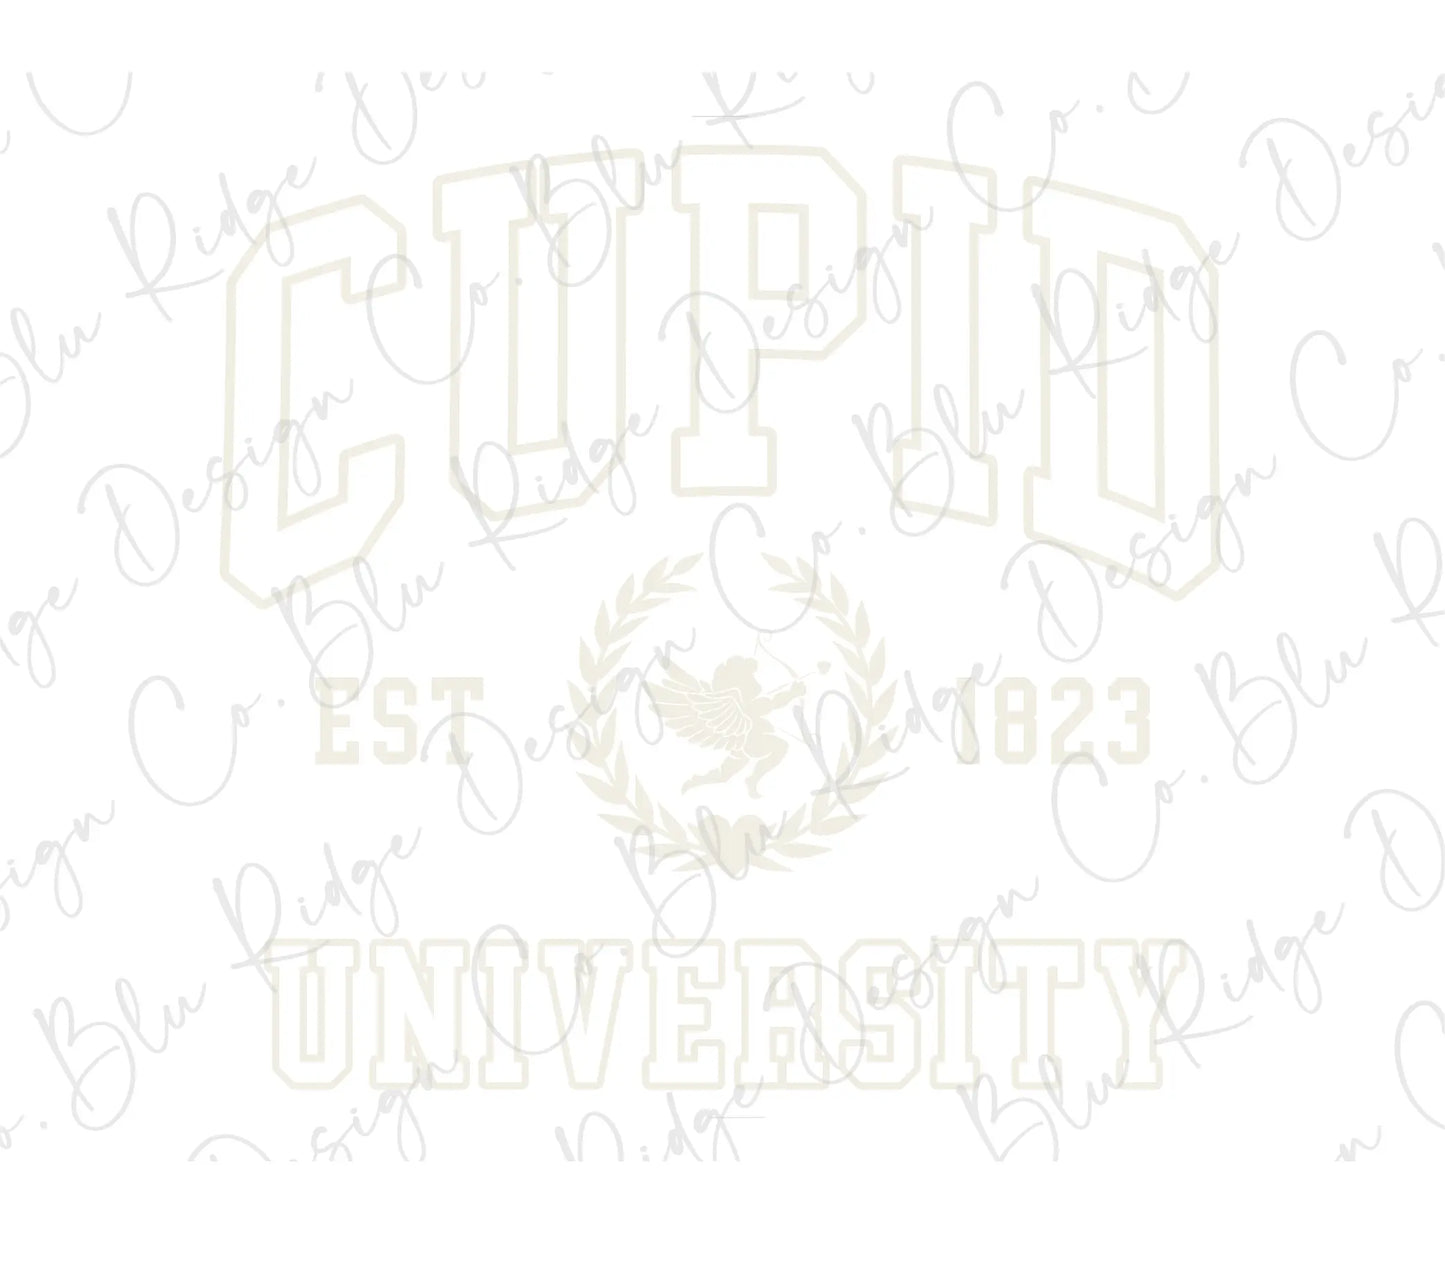 a white background with the words university written in cursive writing